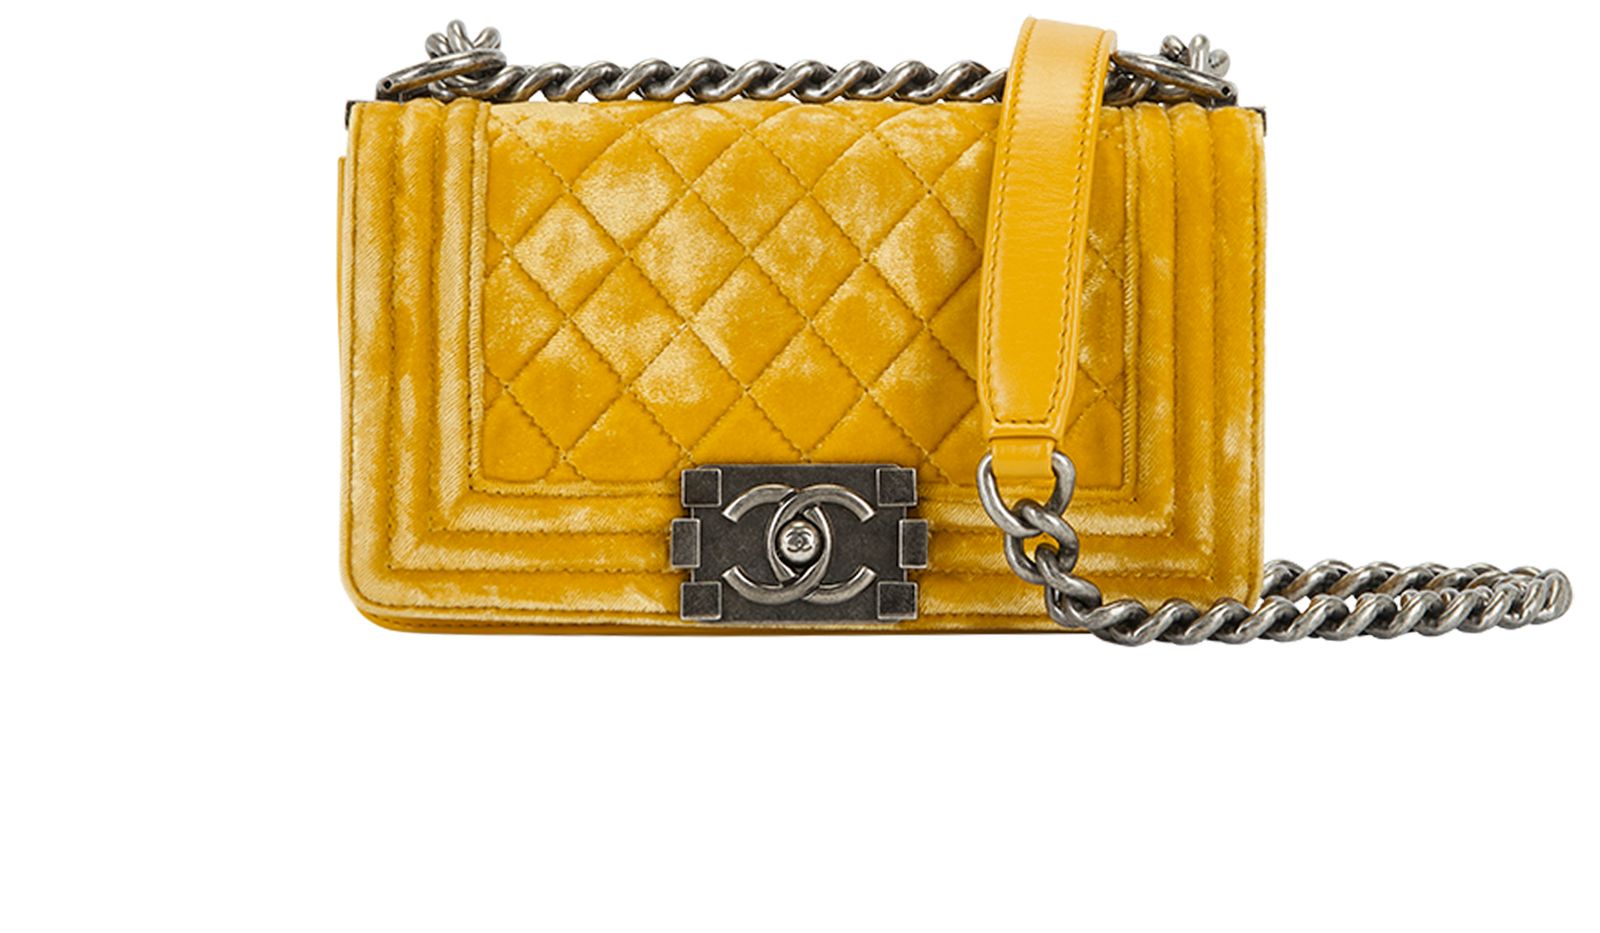 Chanel Quilted Small Boy Bag